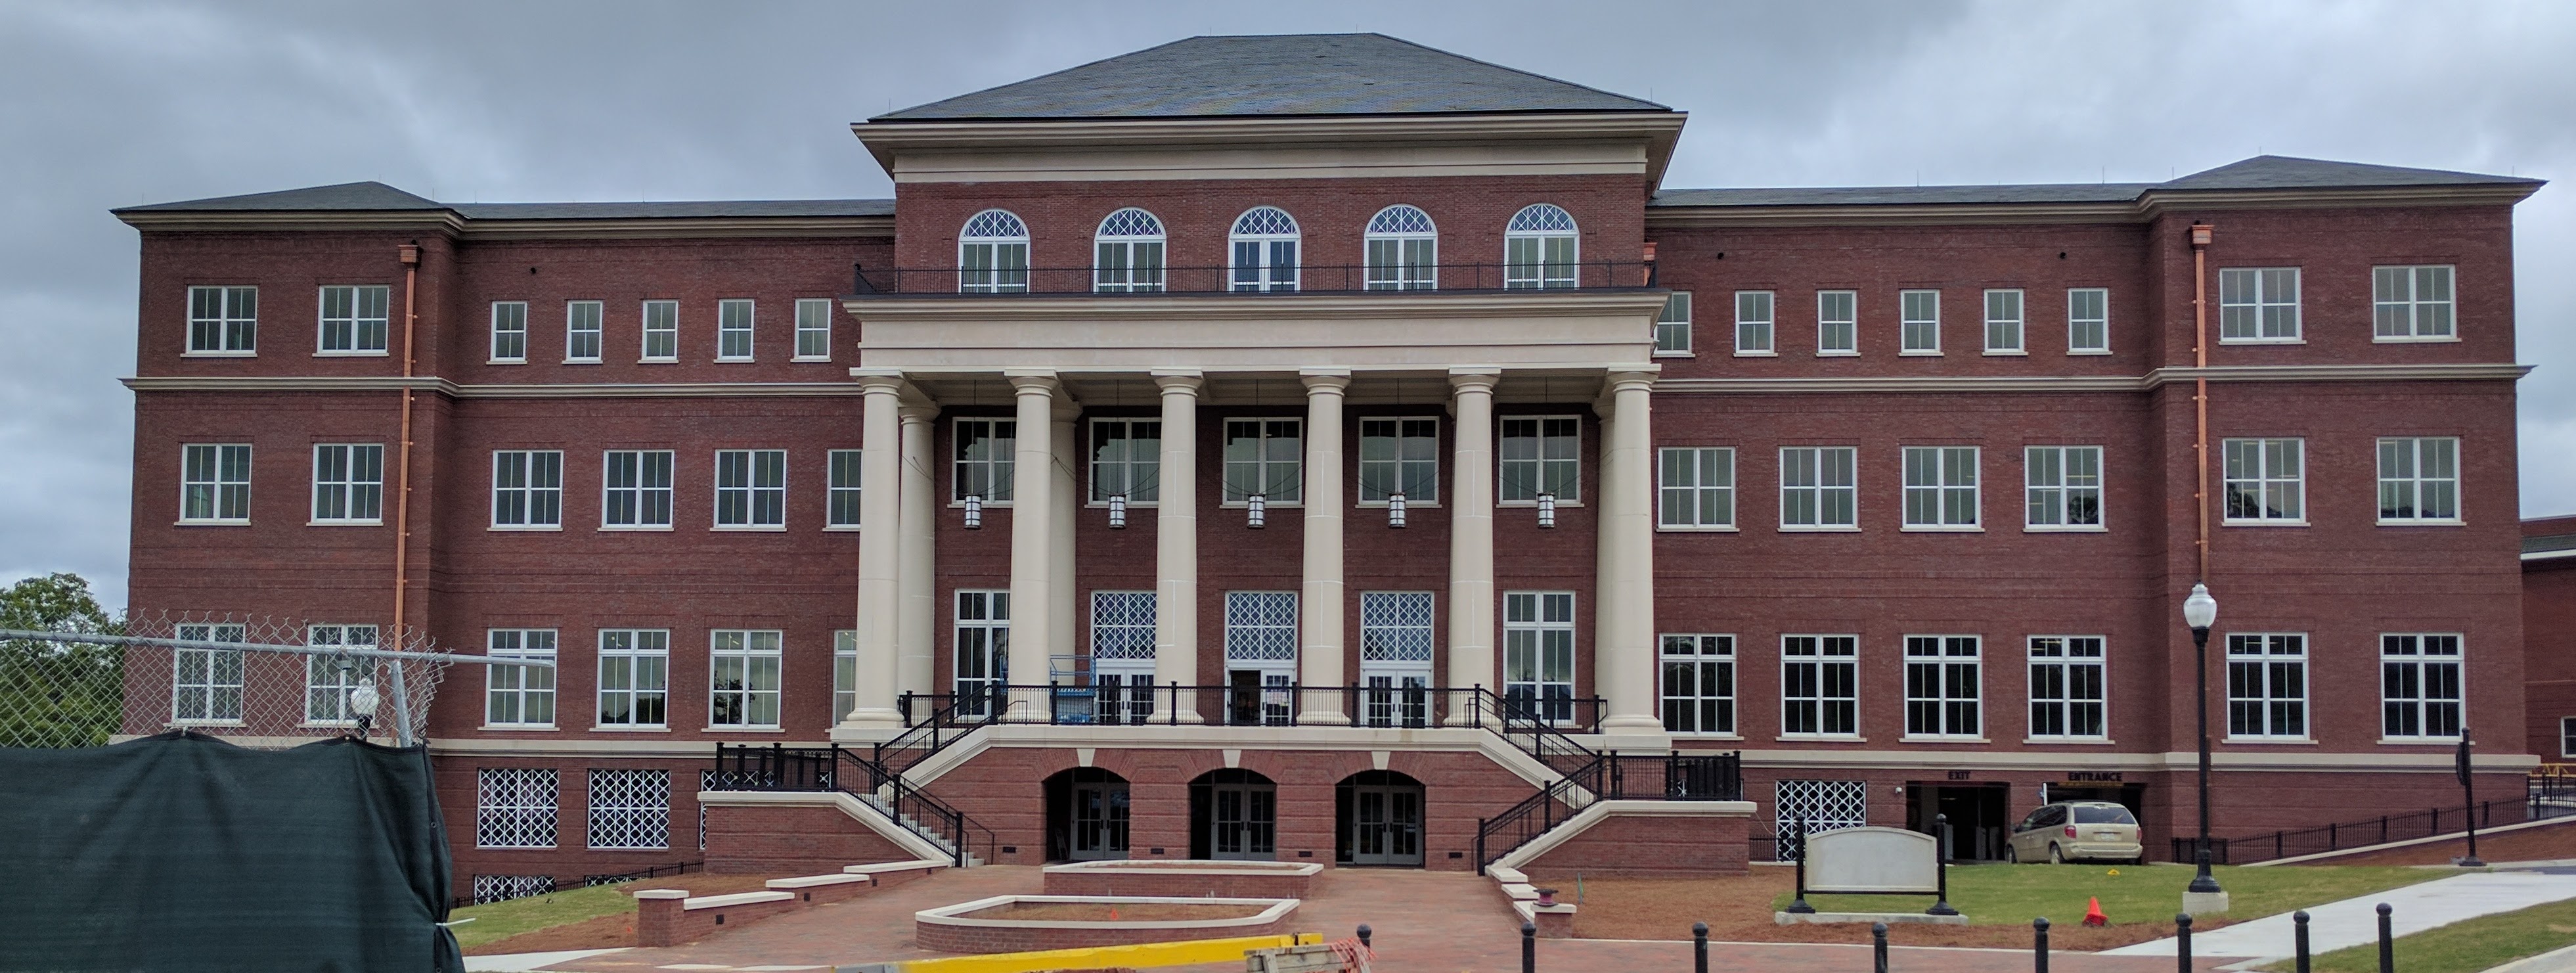 Top 10 Buildings You Need To Know At Mississippi State University